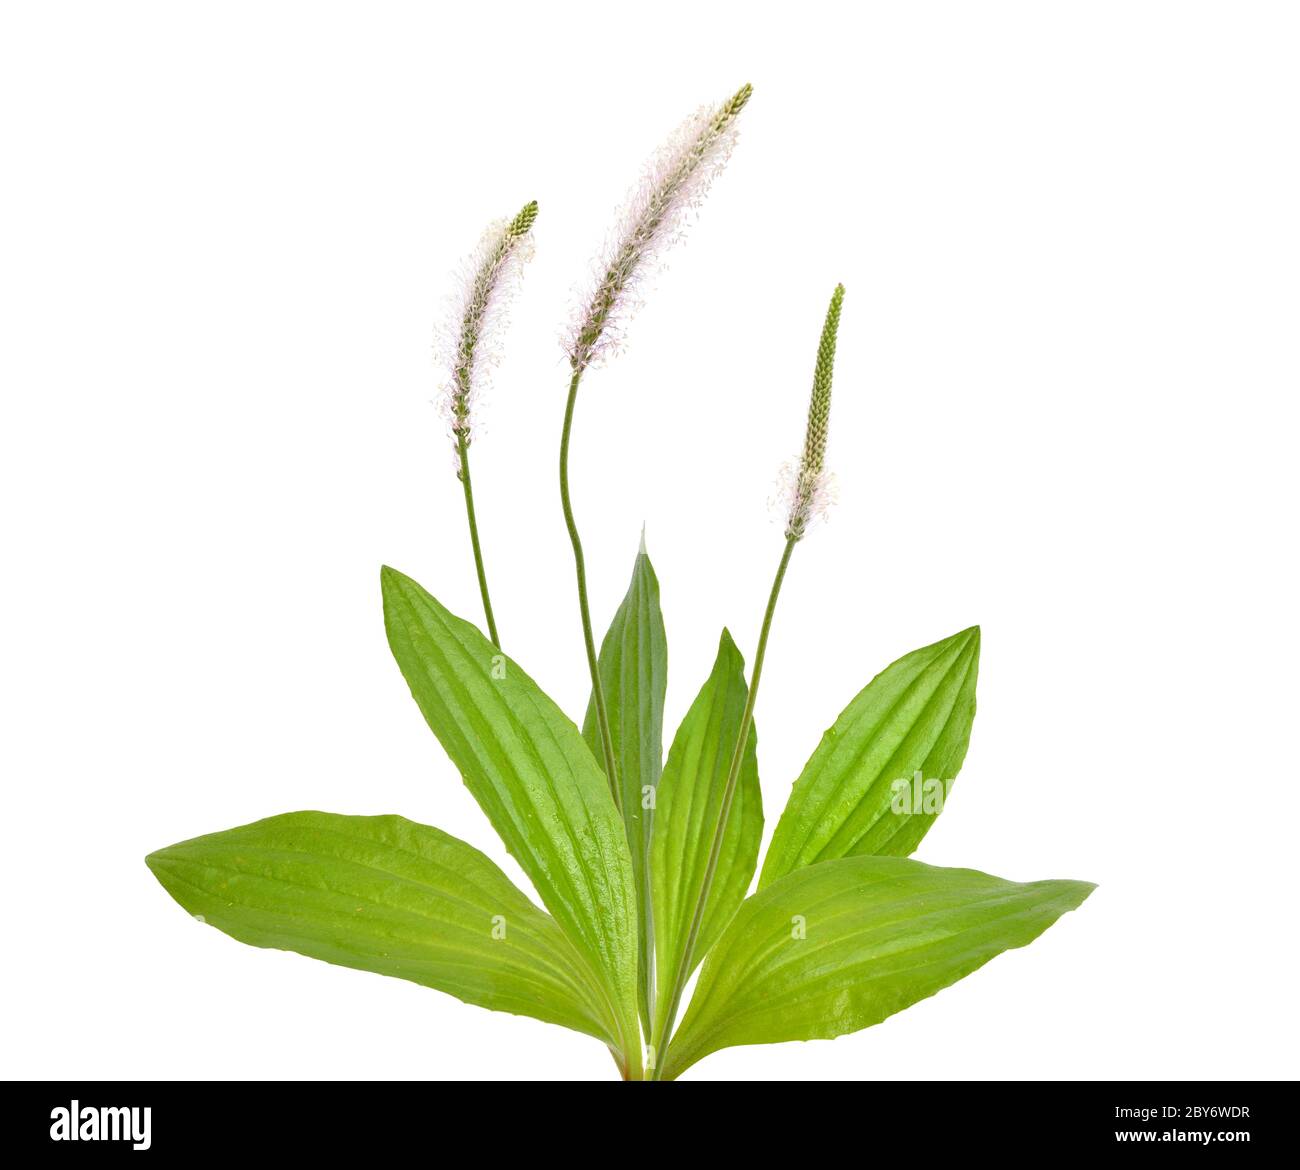 Plantago media, known as the hoary plantain. Isolated on white background Stock Photo